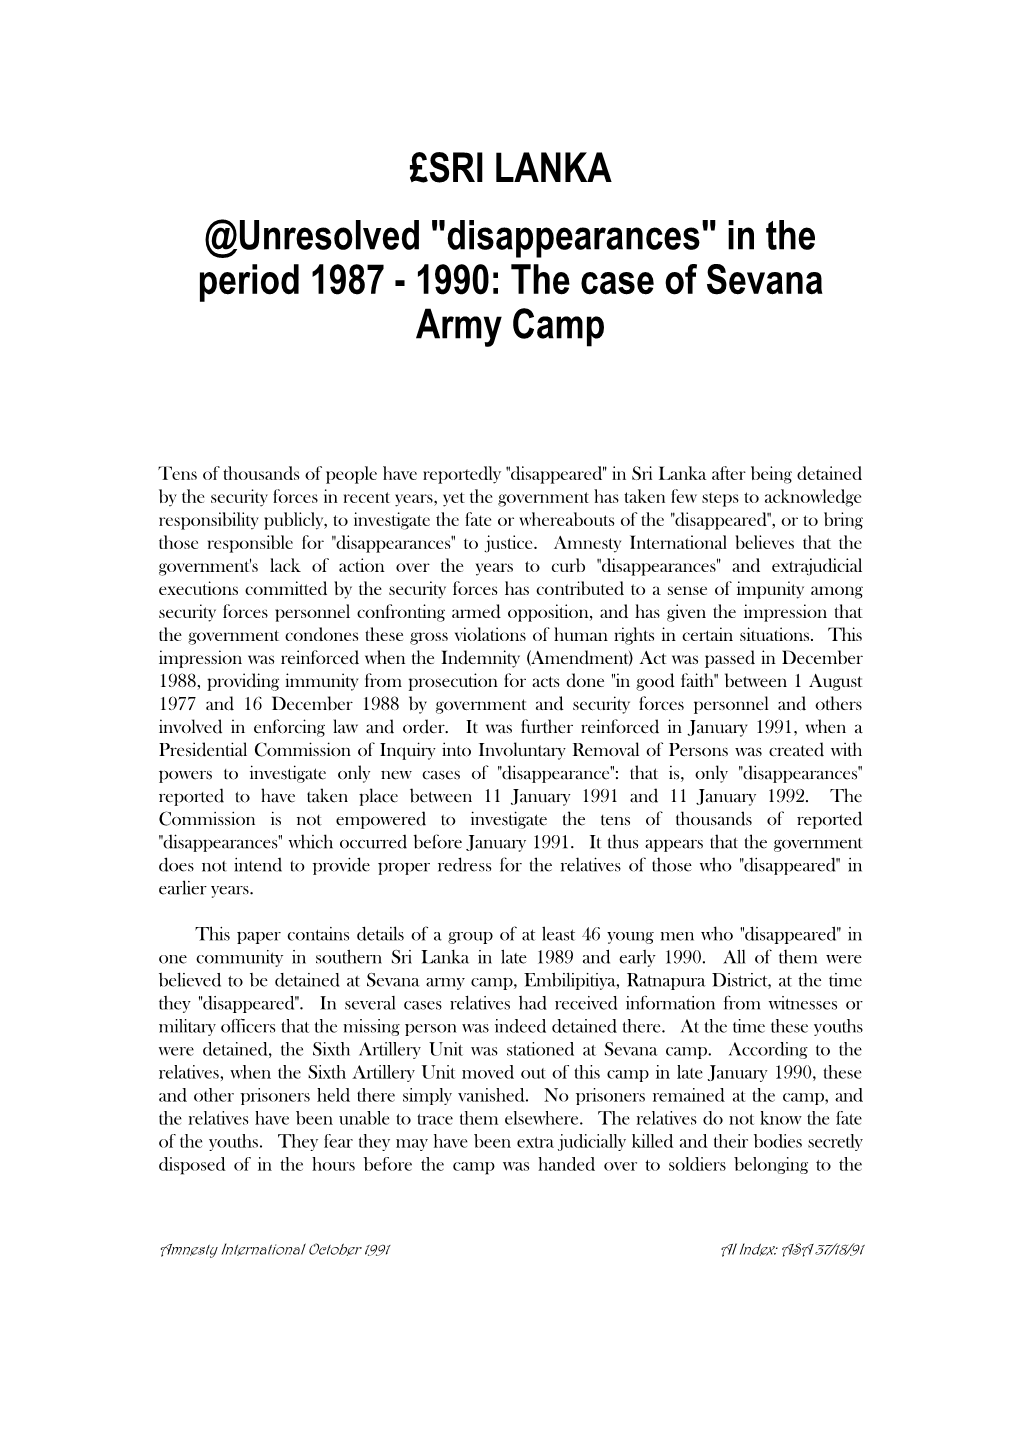 £SRI LANKA @Unresolved "Disappearances" in the Period